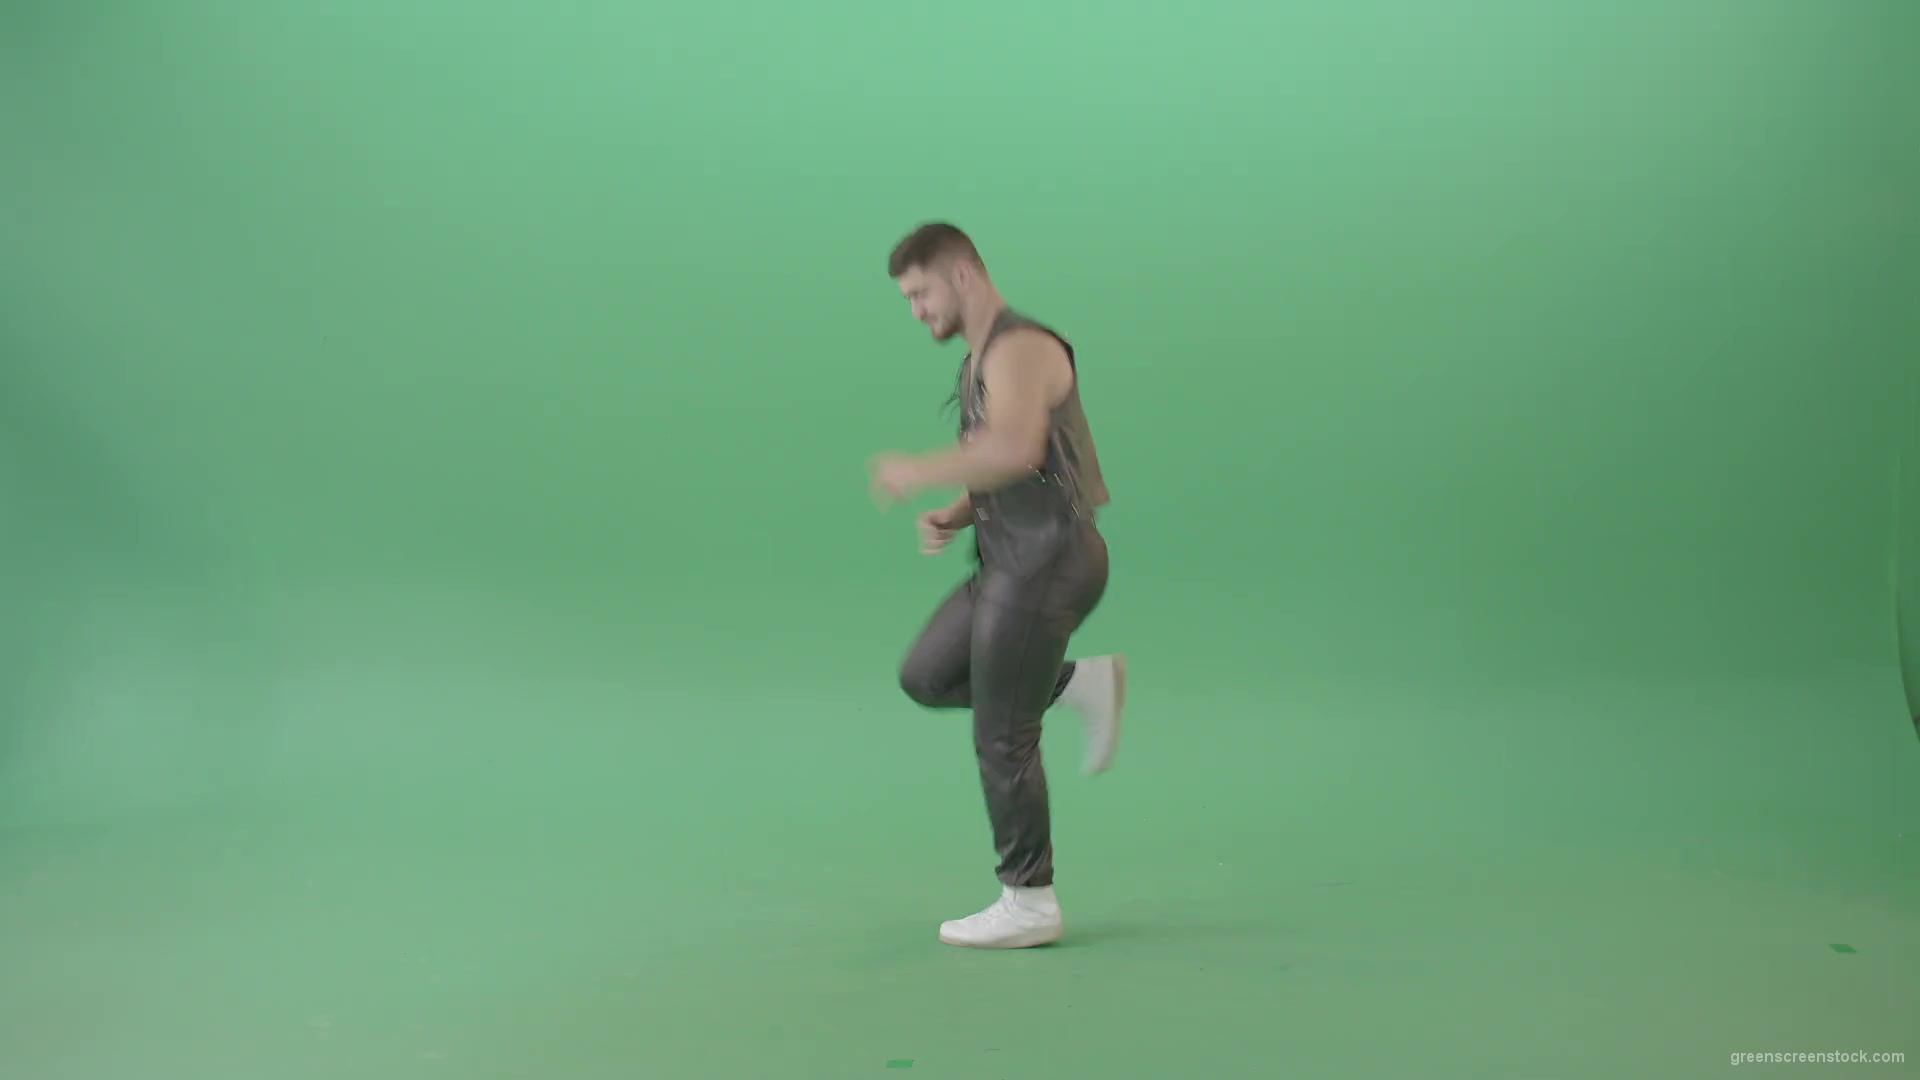 Angry-caucasian-Man-in-Black-leather-costume-dancing-Pop-Moves-on-Green-Screen-4K-Video-Footage-1920_001 Green Screen Stock